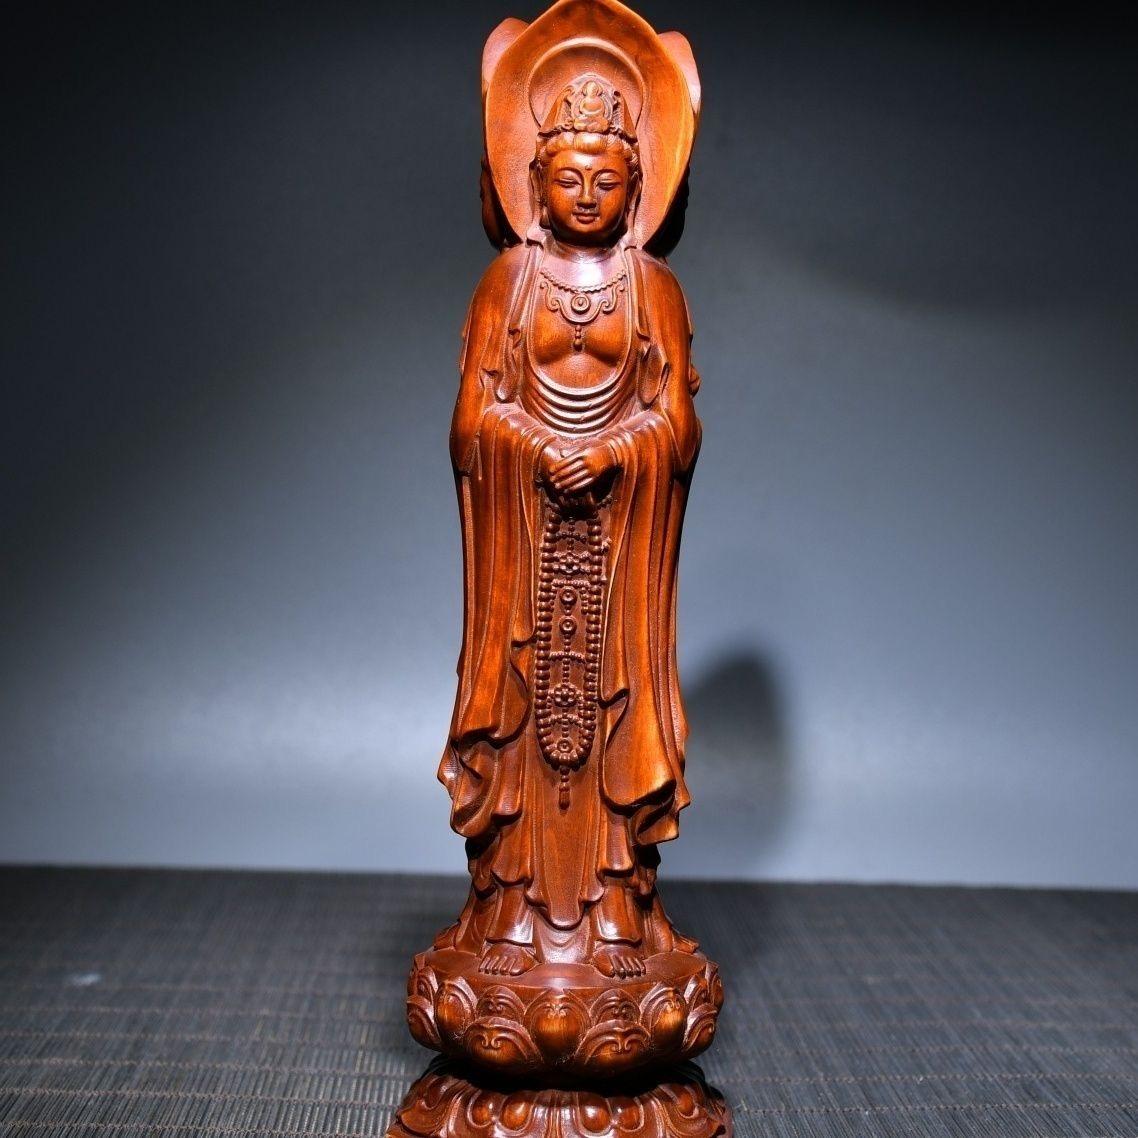 This Chinese Vintage Wood Carving Three Sided Guan Yin Buddhas Statue is very well preserved. Three sided Guanyin refers to a statue of Guanyin with three sides. The front Guanyin holds a scripture box, the right Guanyin holds a lotus, and the left